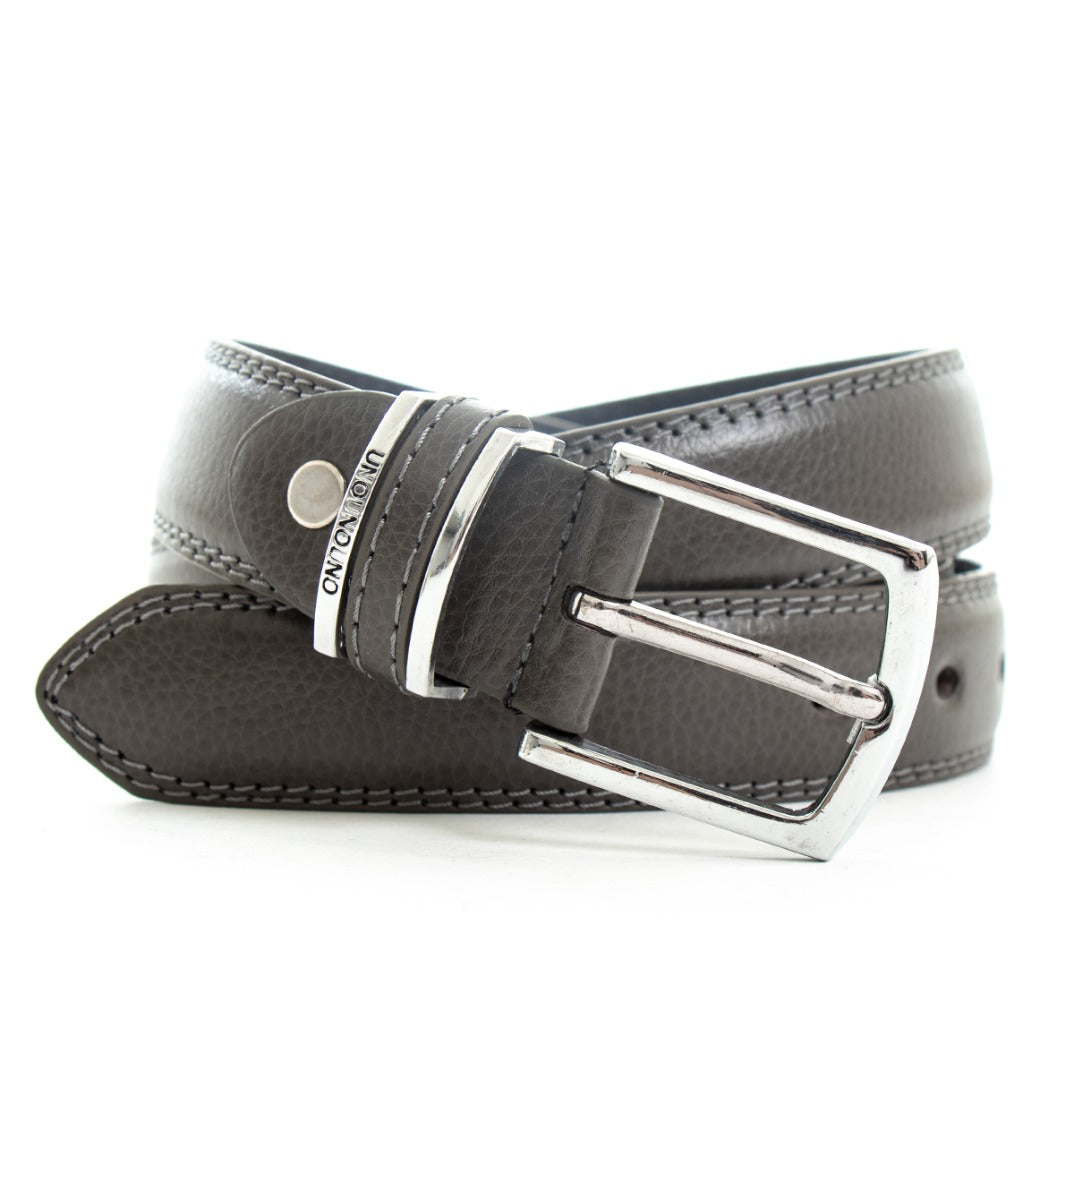 Narrow Men's Belt Adjustable Metal Buckle Gray Textured Faux Leather GIOSAL-A2074A